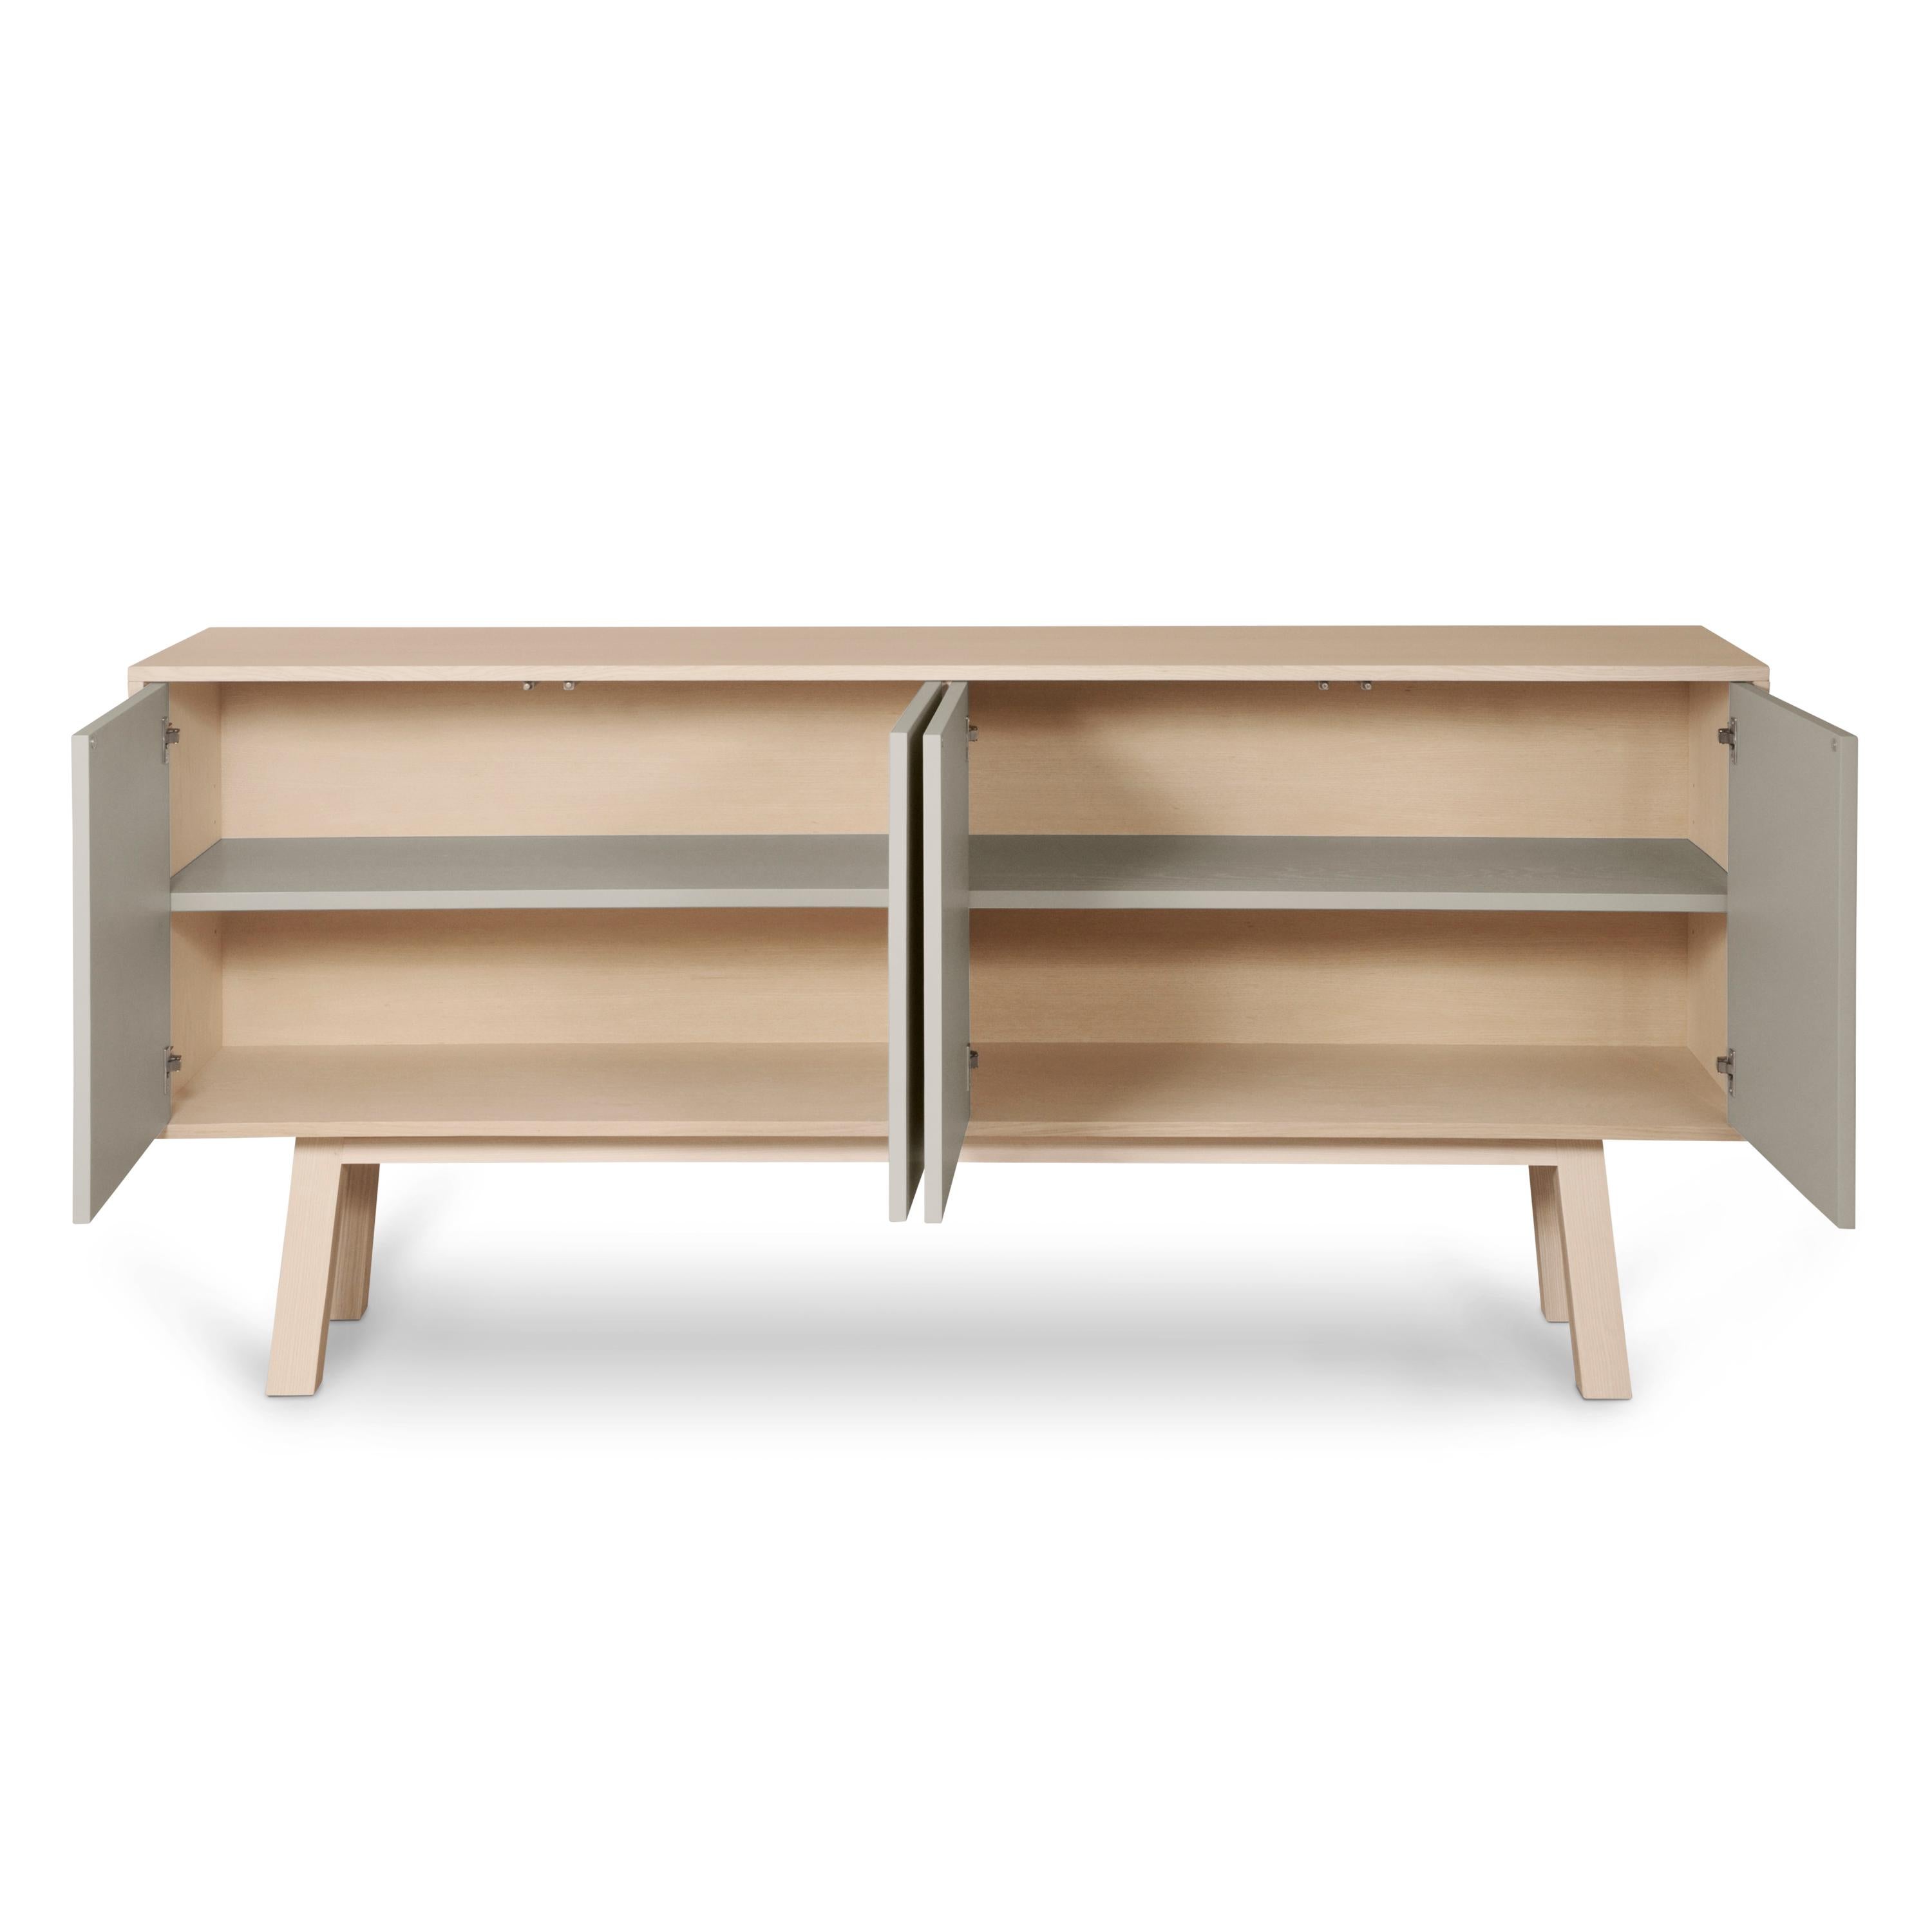 Light Grey Sideboard Kube in Wood, Design Eric Gizard, Paris Made in France For Sale 1